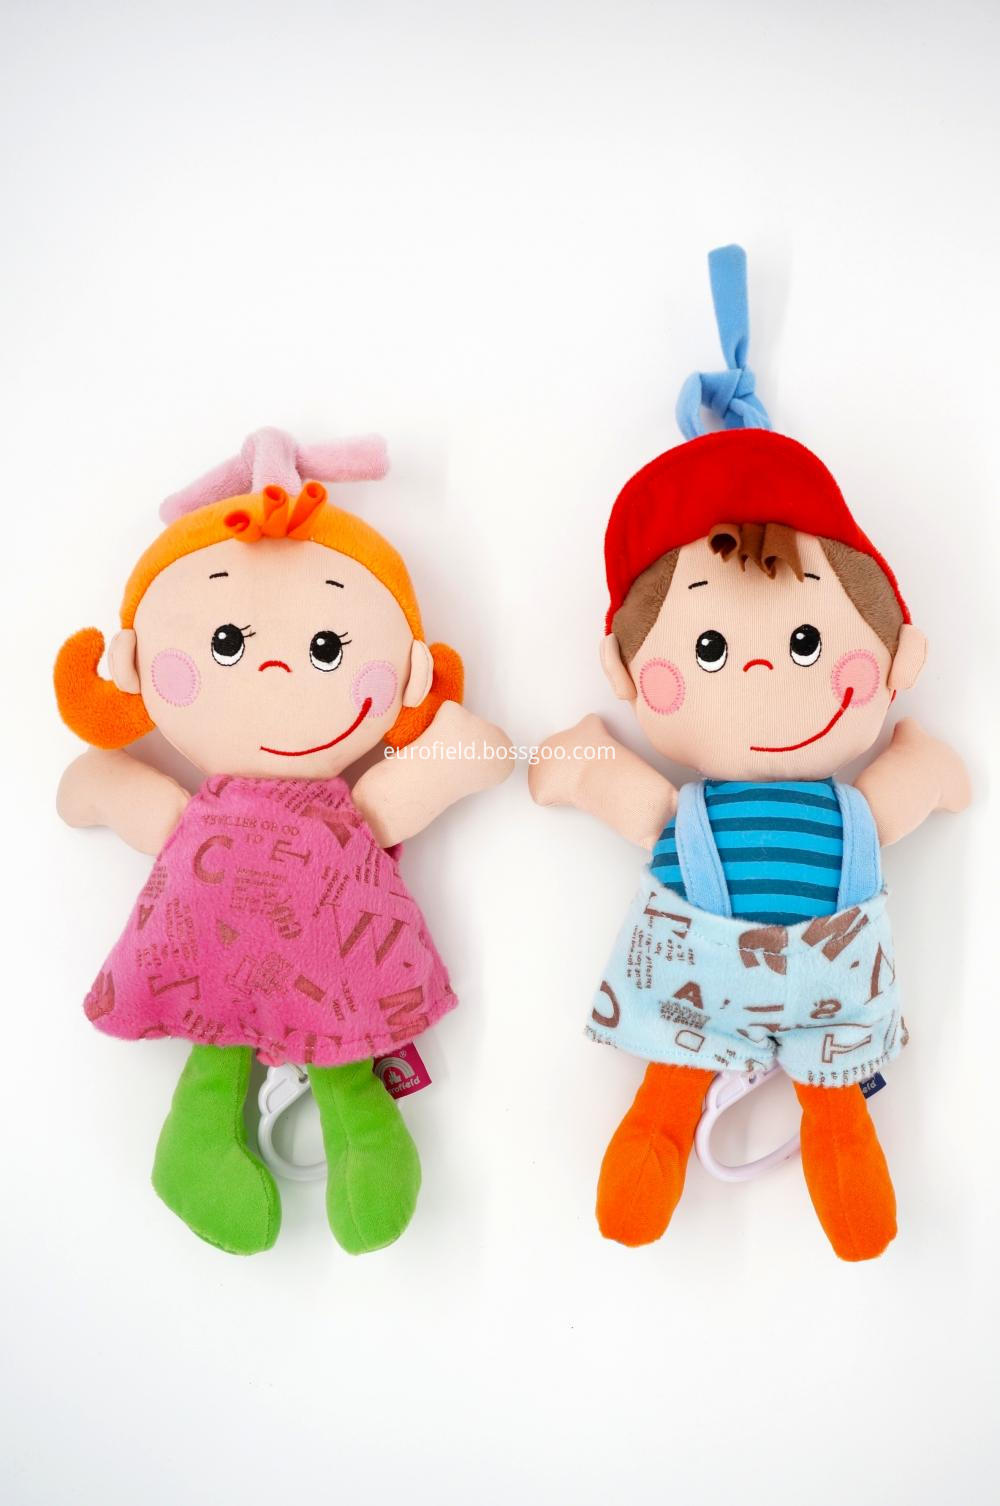 Pulling Musical Plush Toy Boy and Girl doll